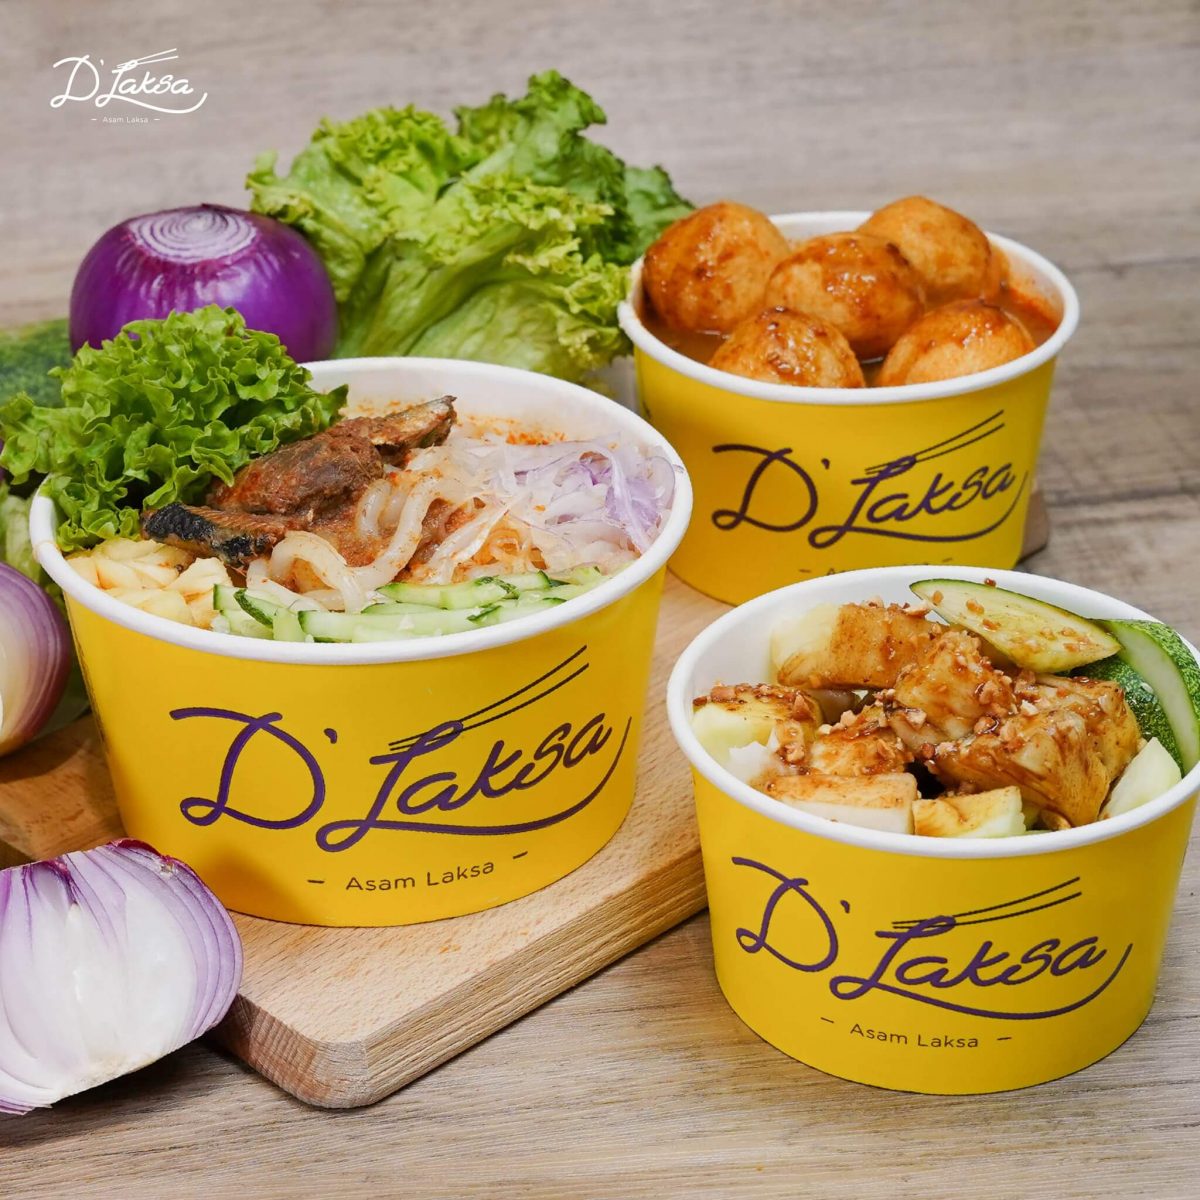 D'laksa Sunway Pyramid - With different varieties, you’ll never get bored of Laksa!